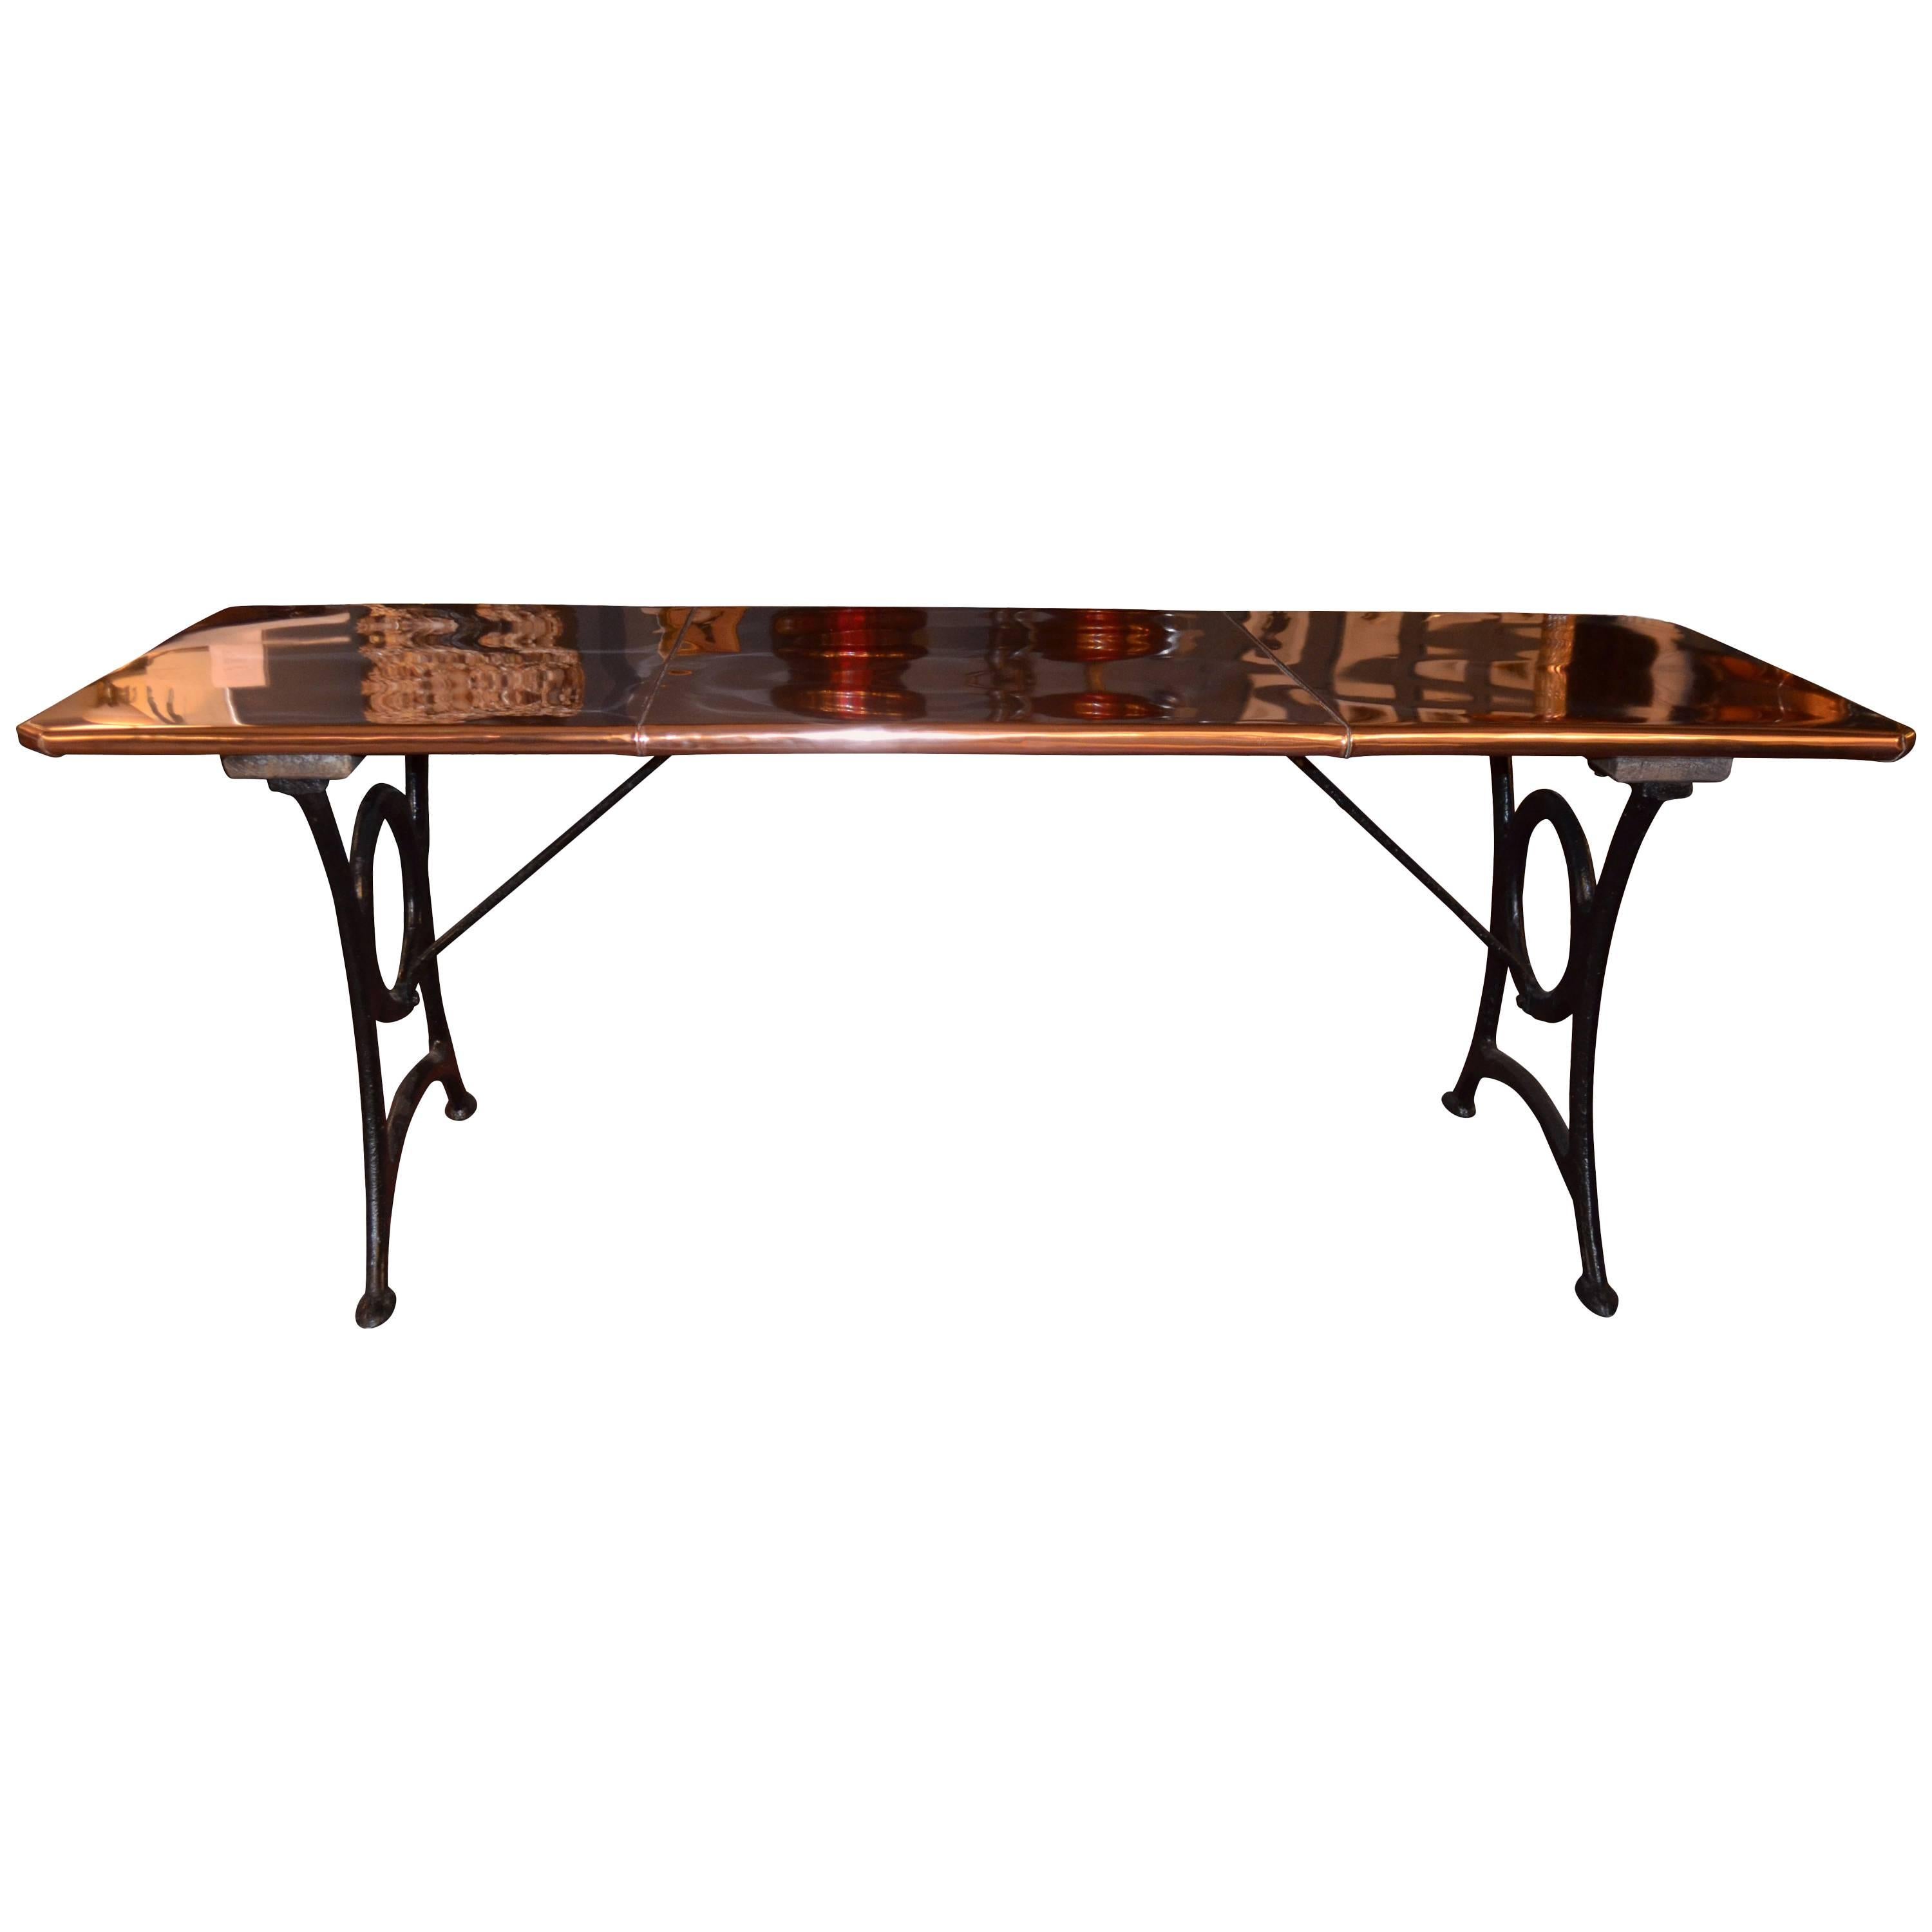 19th Century Victorian Wrought Iron and Polished Copper Table